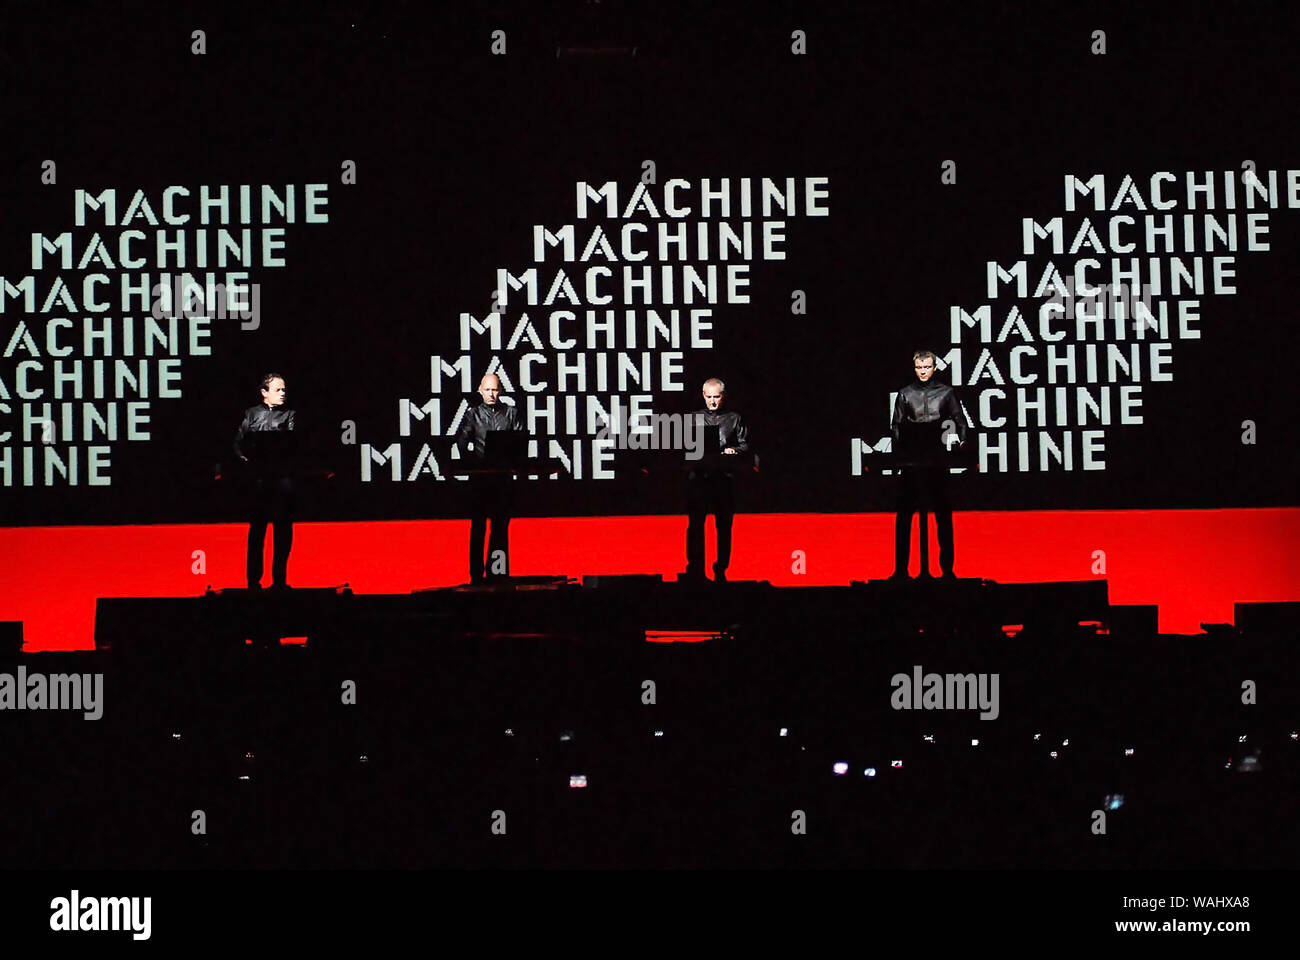 Rio de Janeiro, Brazil, March 20, 2009. Members of the German band Kraftwerk during their show in the Apoteose Square in the city of Rio de Janeiro. Stock Photo